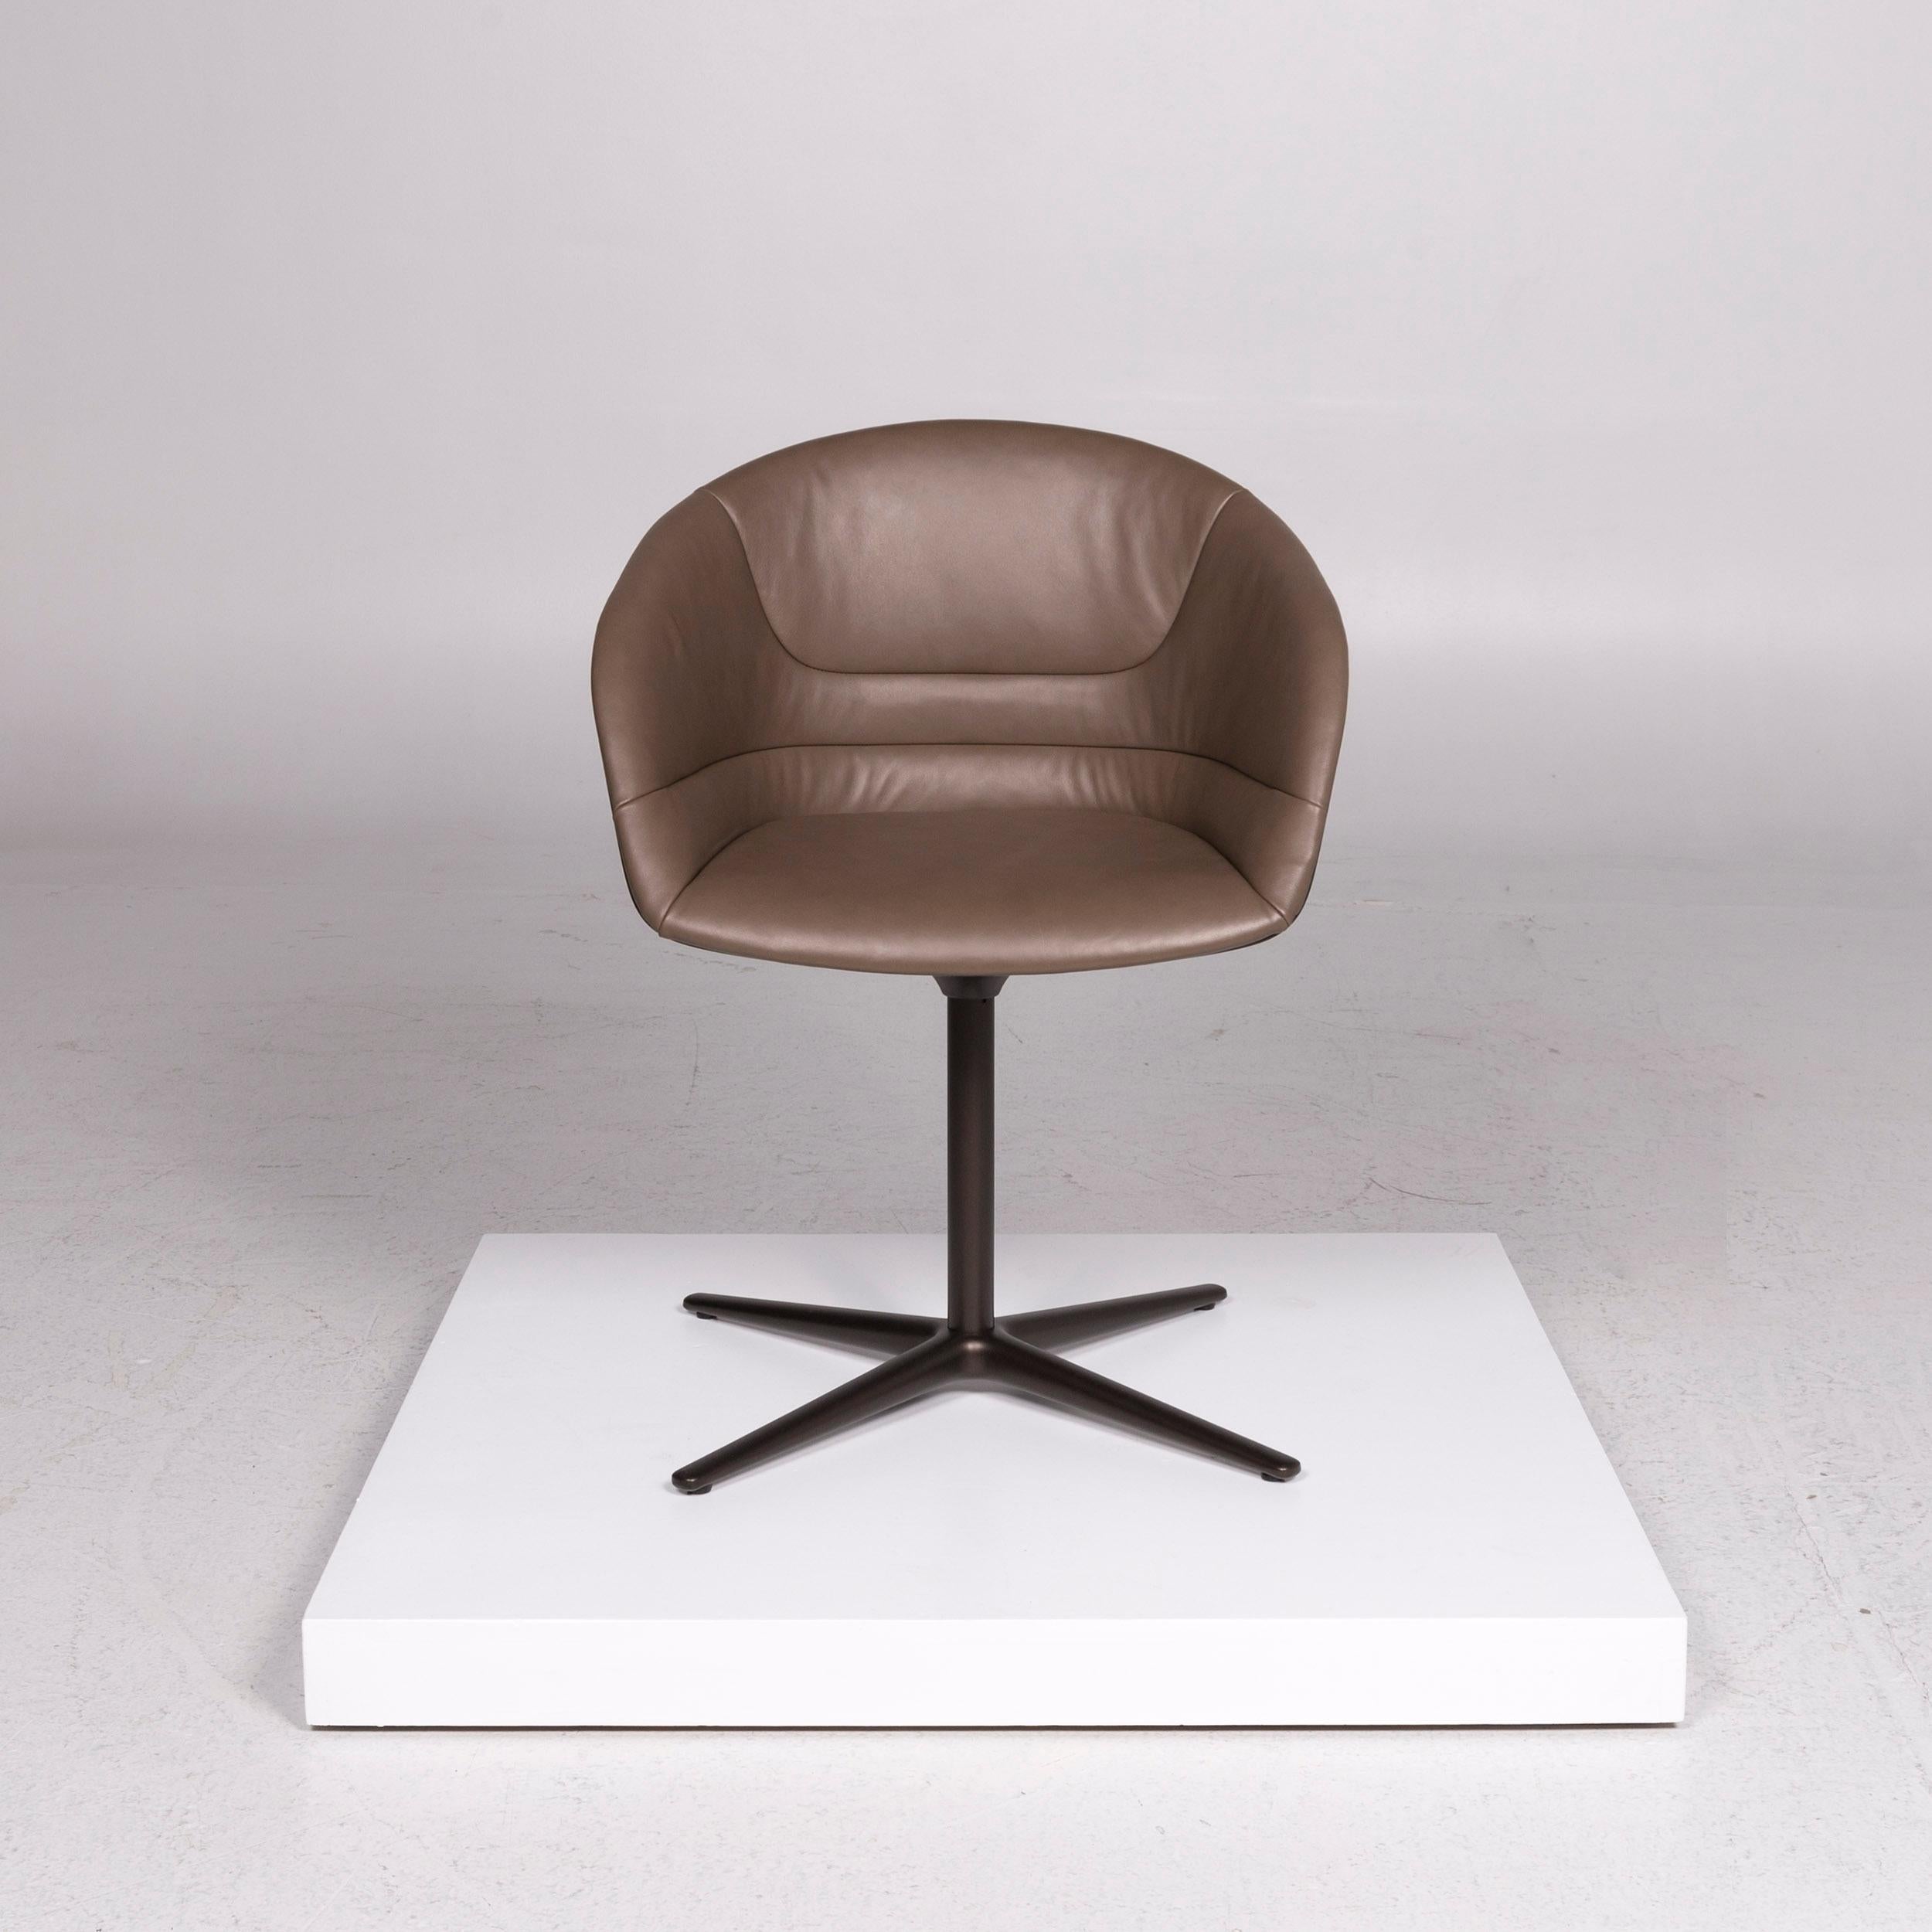 We bring to you a Walter Knoll Kyo Ledear armchair brown chair.


 Product measurements in centimeters:
 

 Depth 56
Width 60
Height 81
Seat-height 48
Rest-height 68
Seat-depth 45
Seat-width 44
Back-height 32.
  